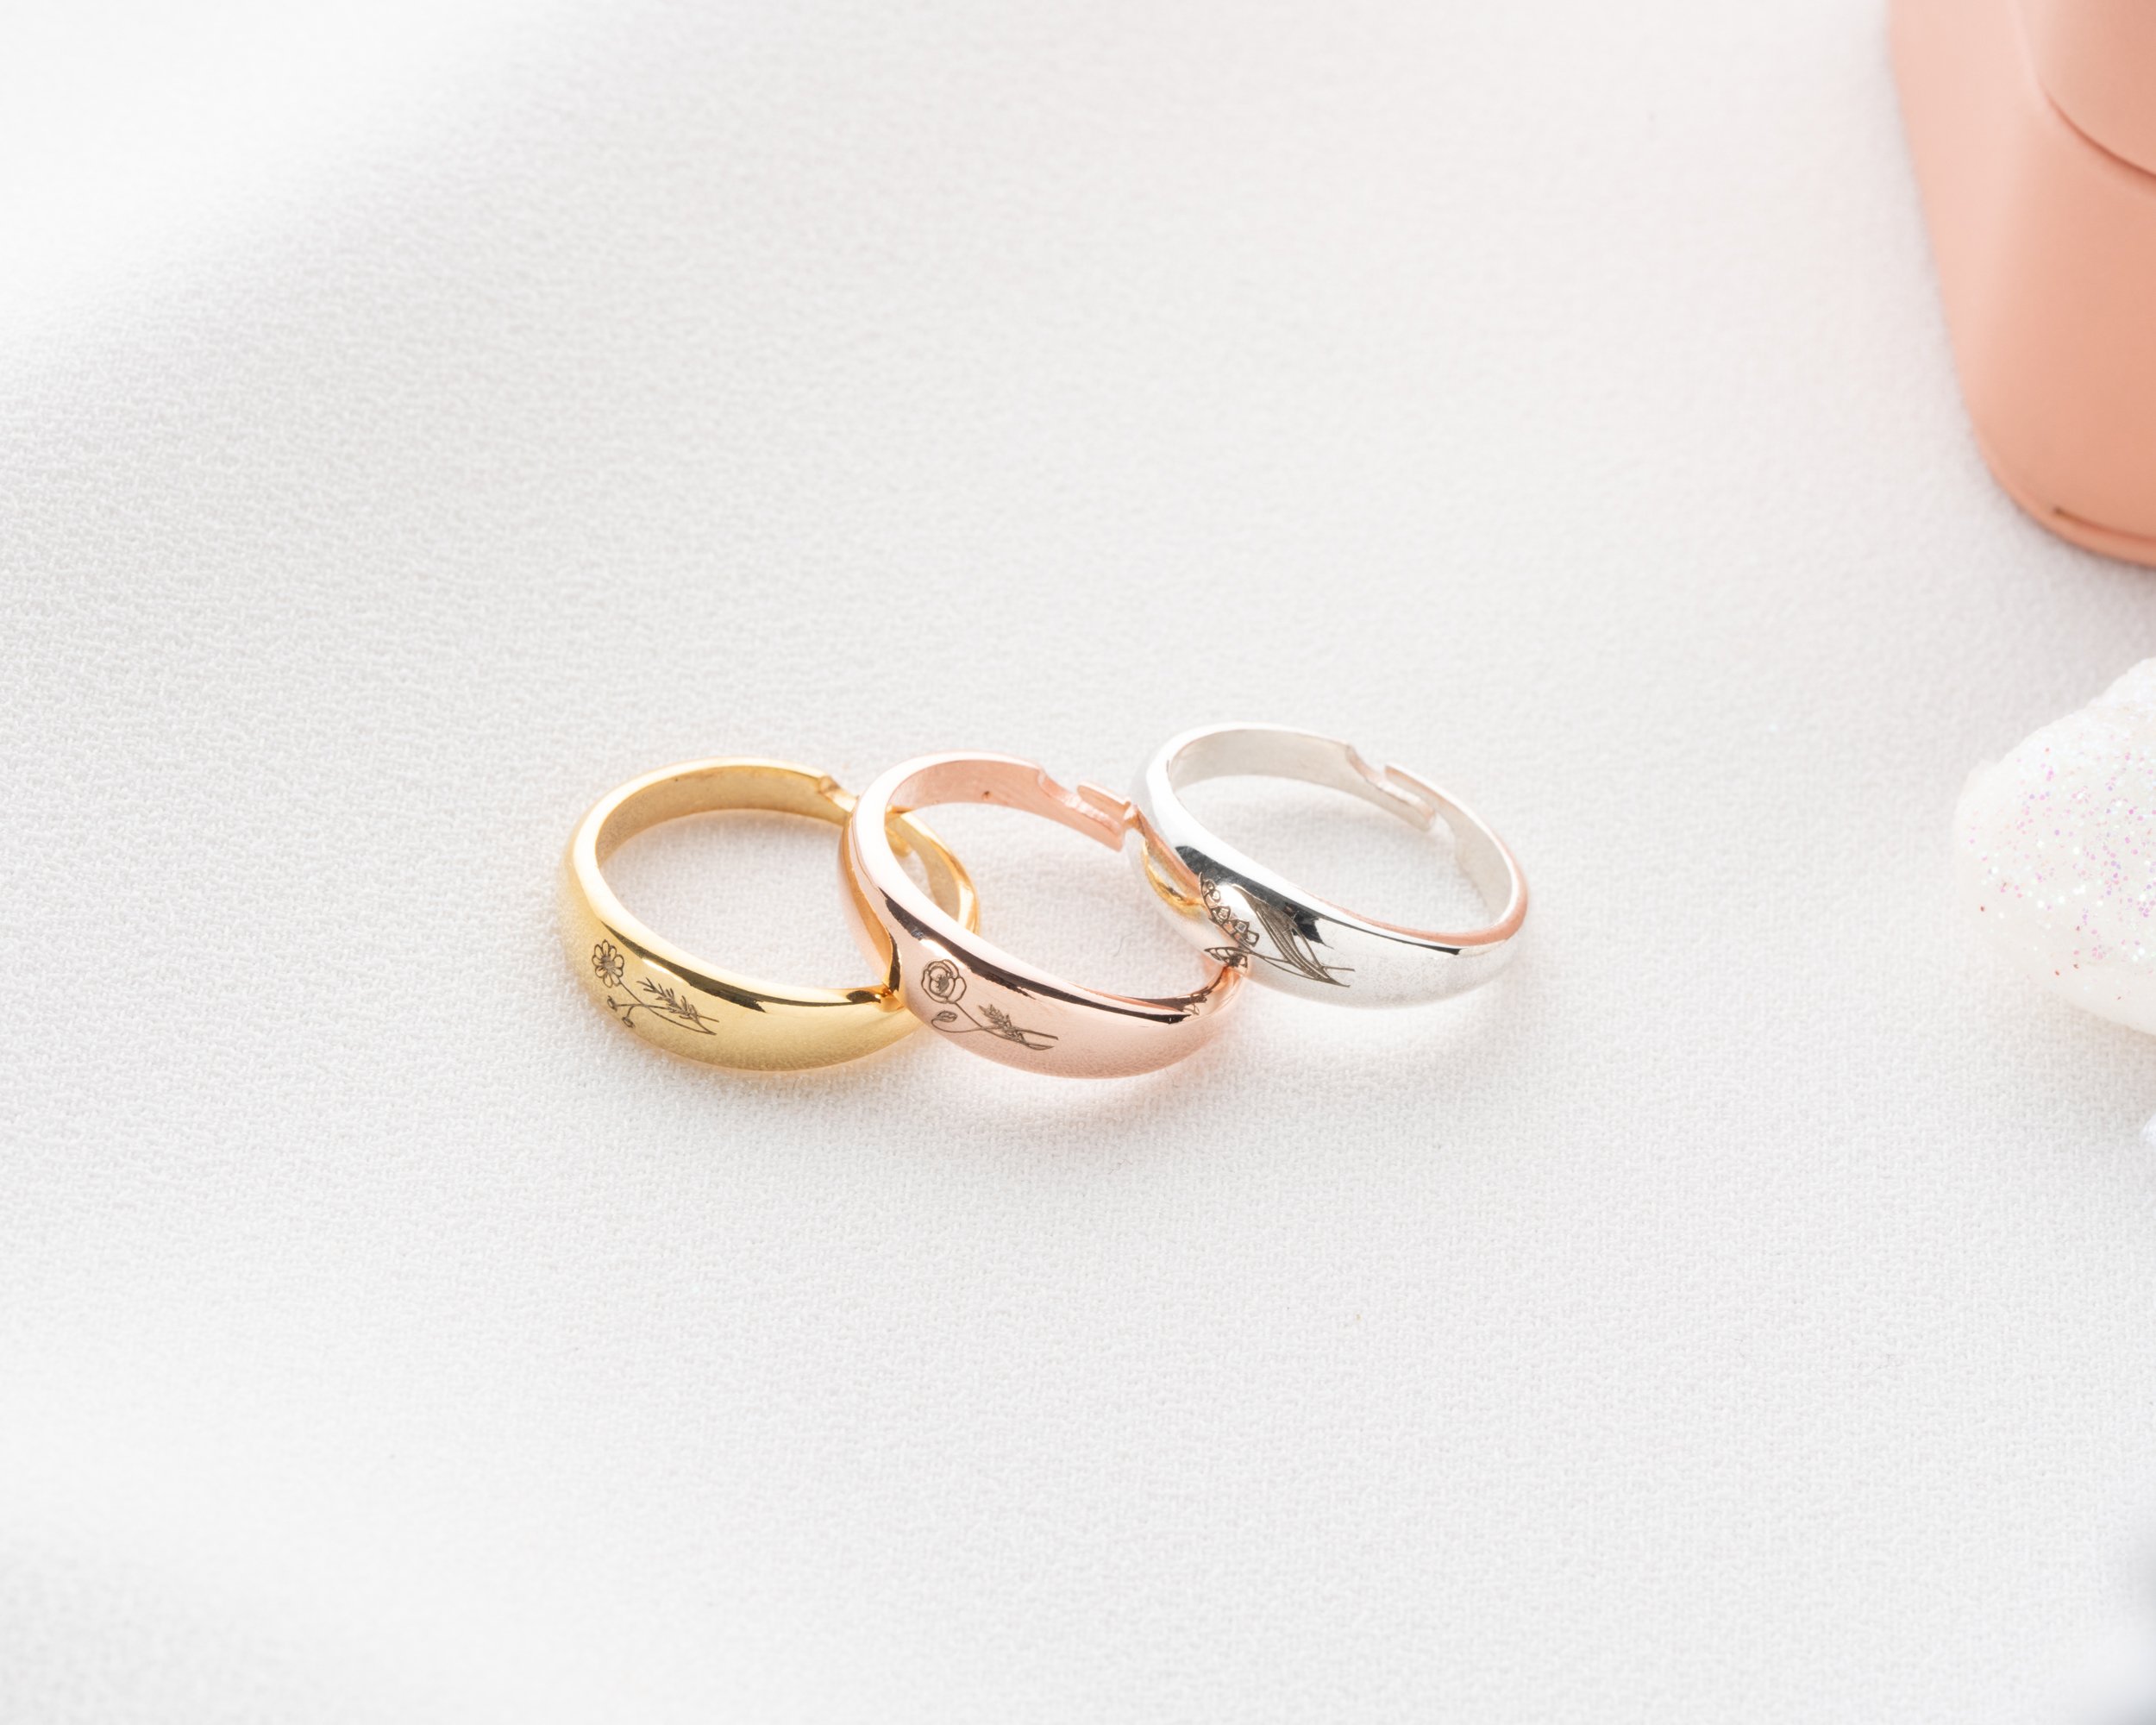 Customizable Ring: Personalized Beauty for Your Fingers